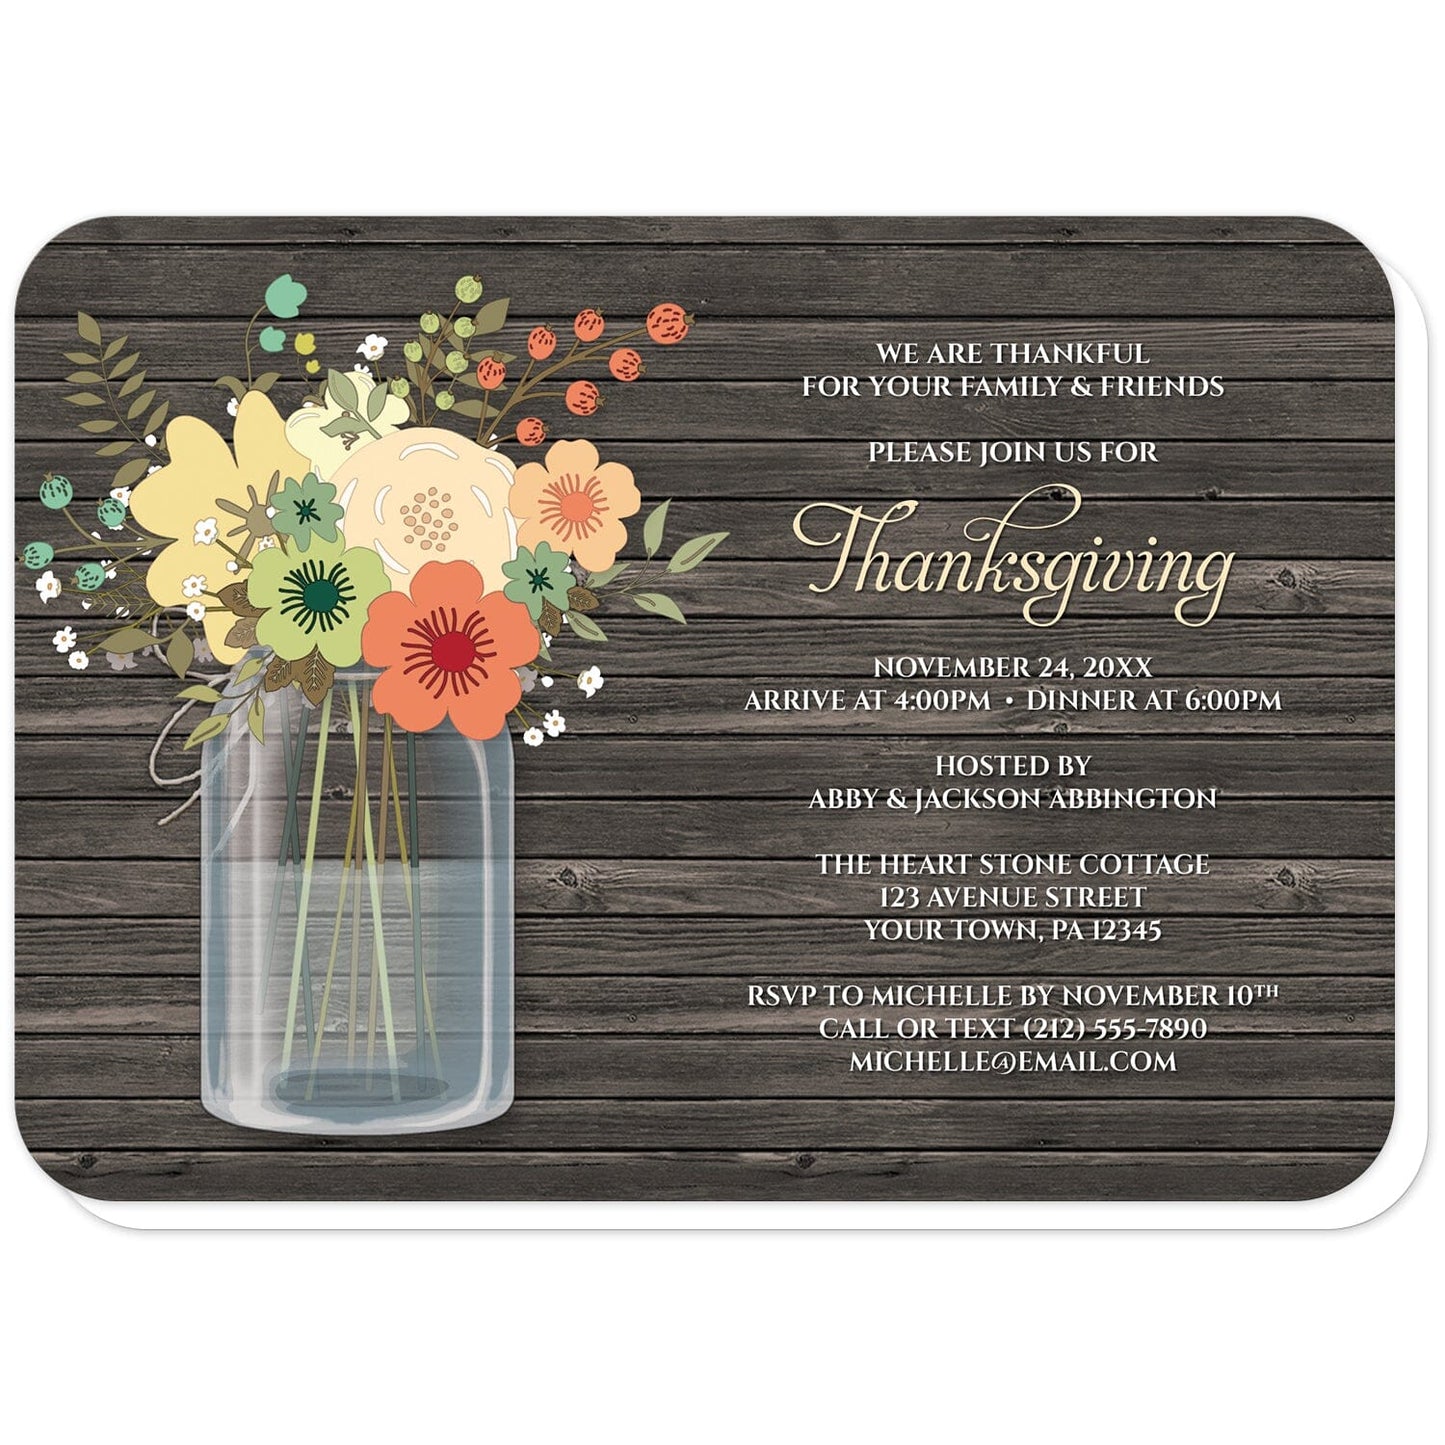 Rustic Floral Wood Mason Jar Thanksgiving Invitations (with rounded corners) at Artistically Invited. Rustic floral wood mason jar Thanksgiving invitations with a pretty orange and teal floral mason jar theme with yellow, beige, and green accent flowers. Your personalized holiday celebration details are custom printed in beige, green, and white over a dark brown rustic wood pattern background next to the mason jar illustration, in both script and all-capital letters fonts.